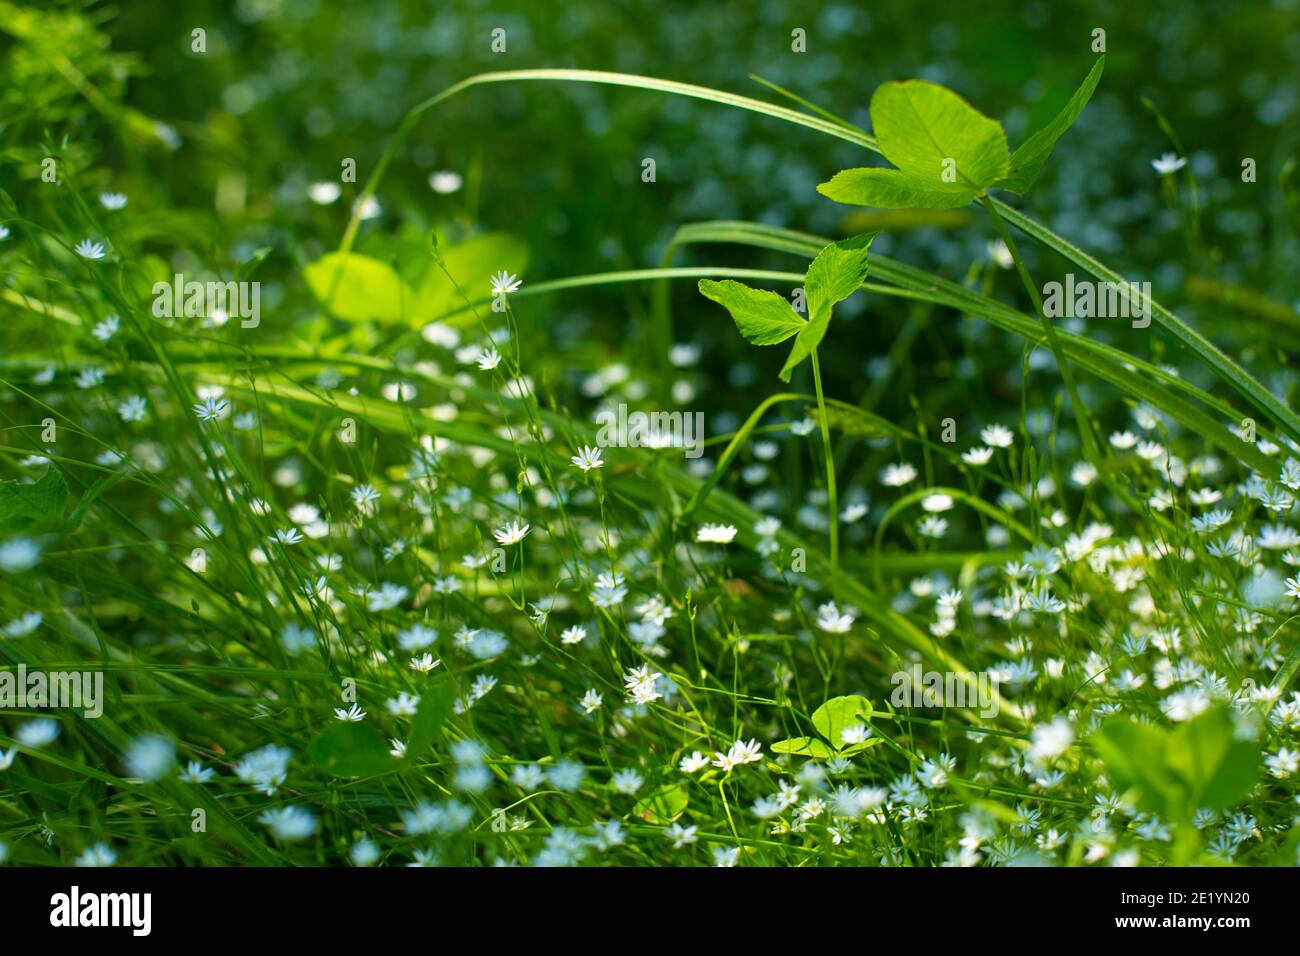 A green field with delicate small white blooming flowers. Lightness and greenery. Spring. Stock Photo